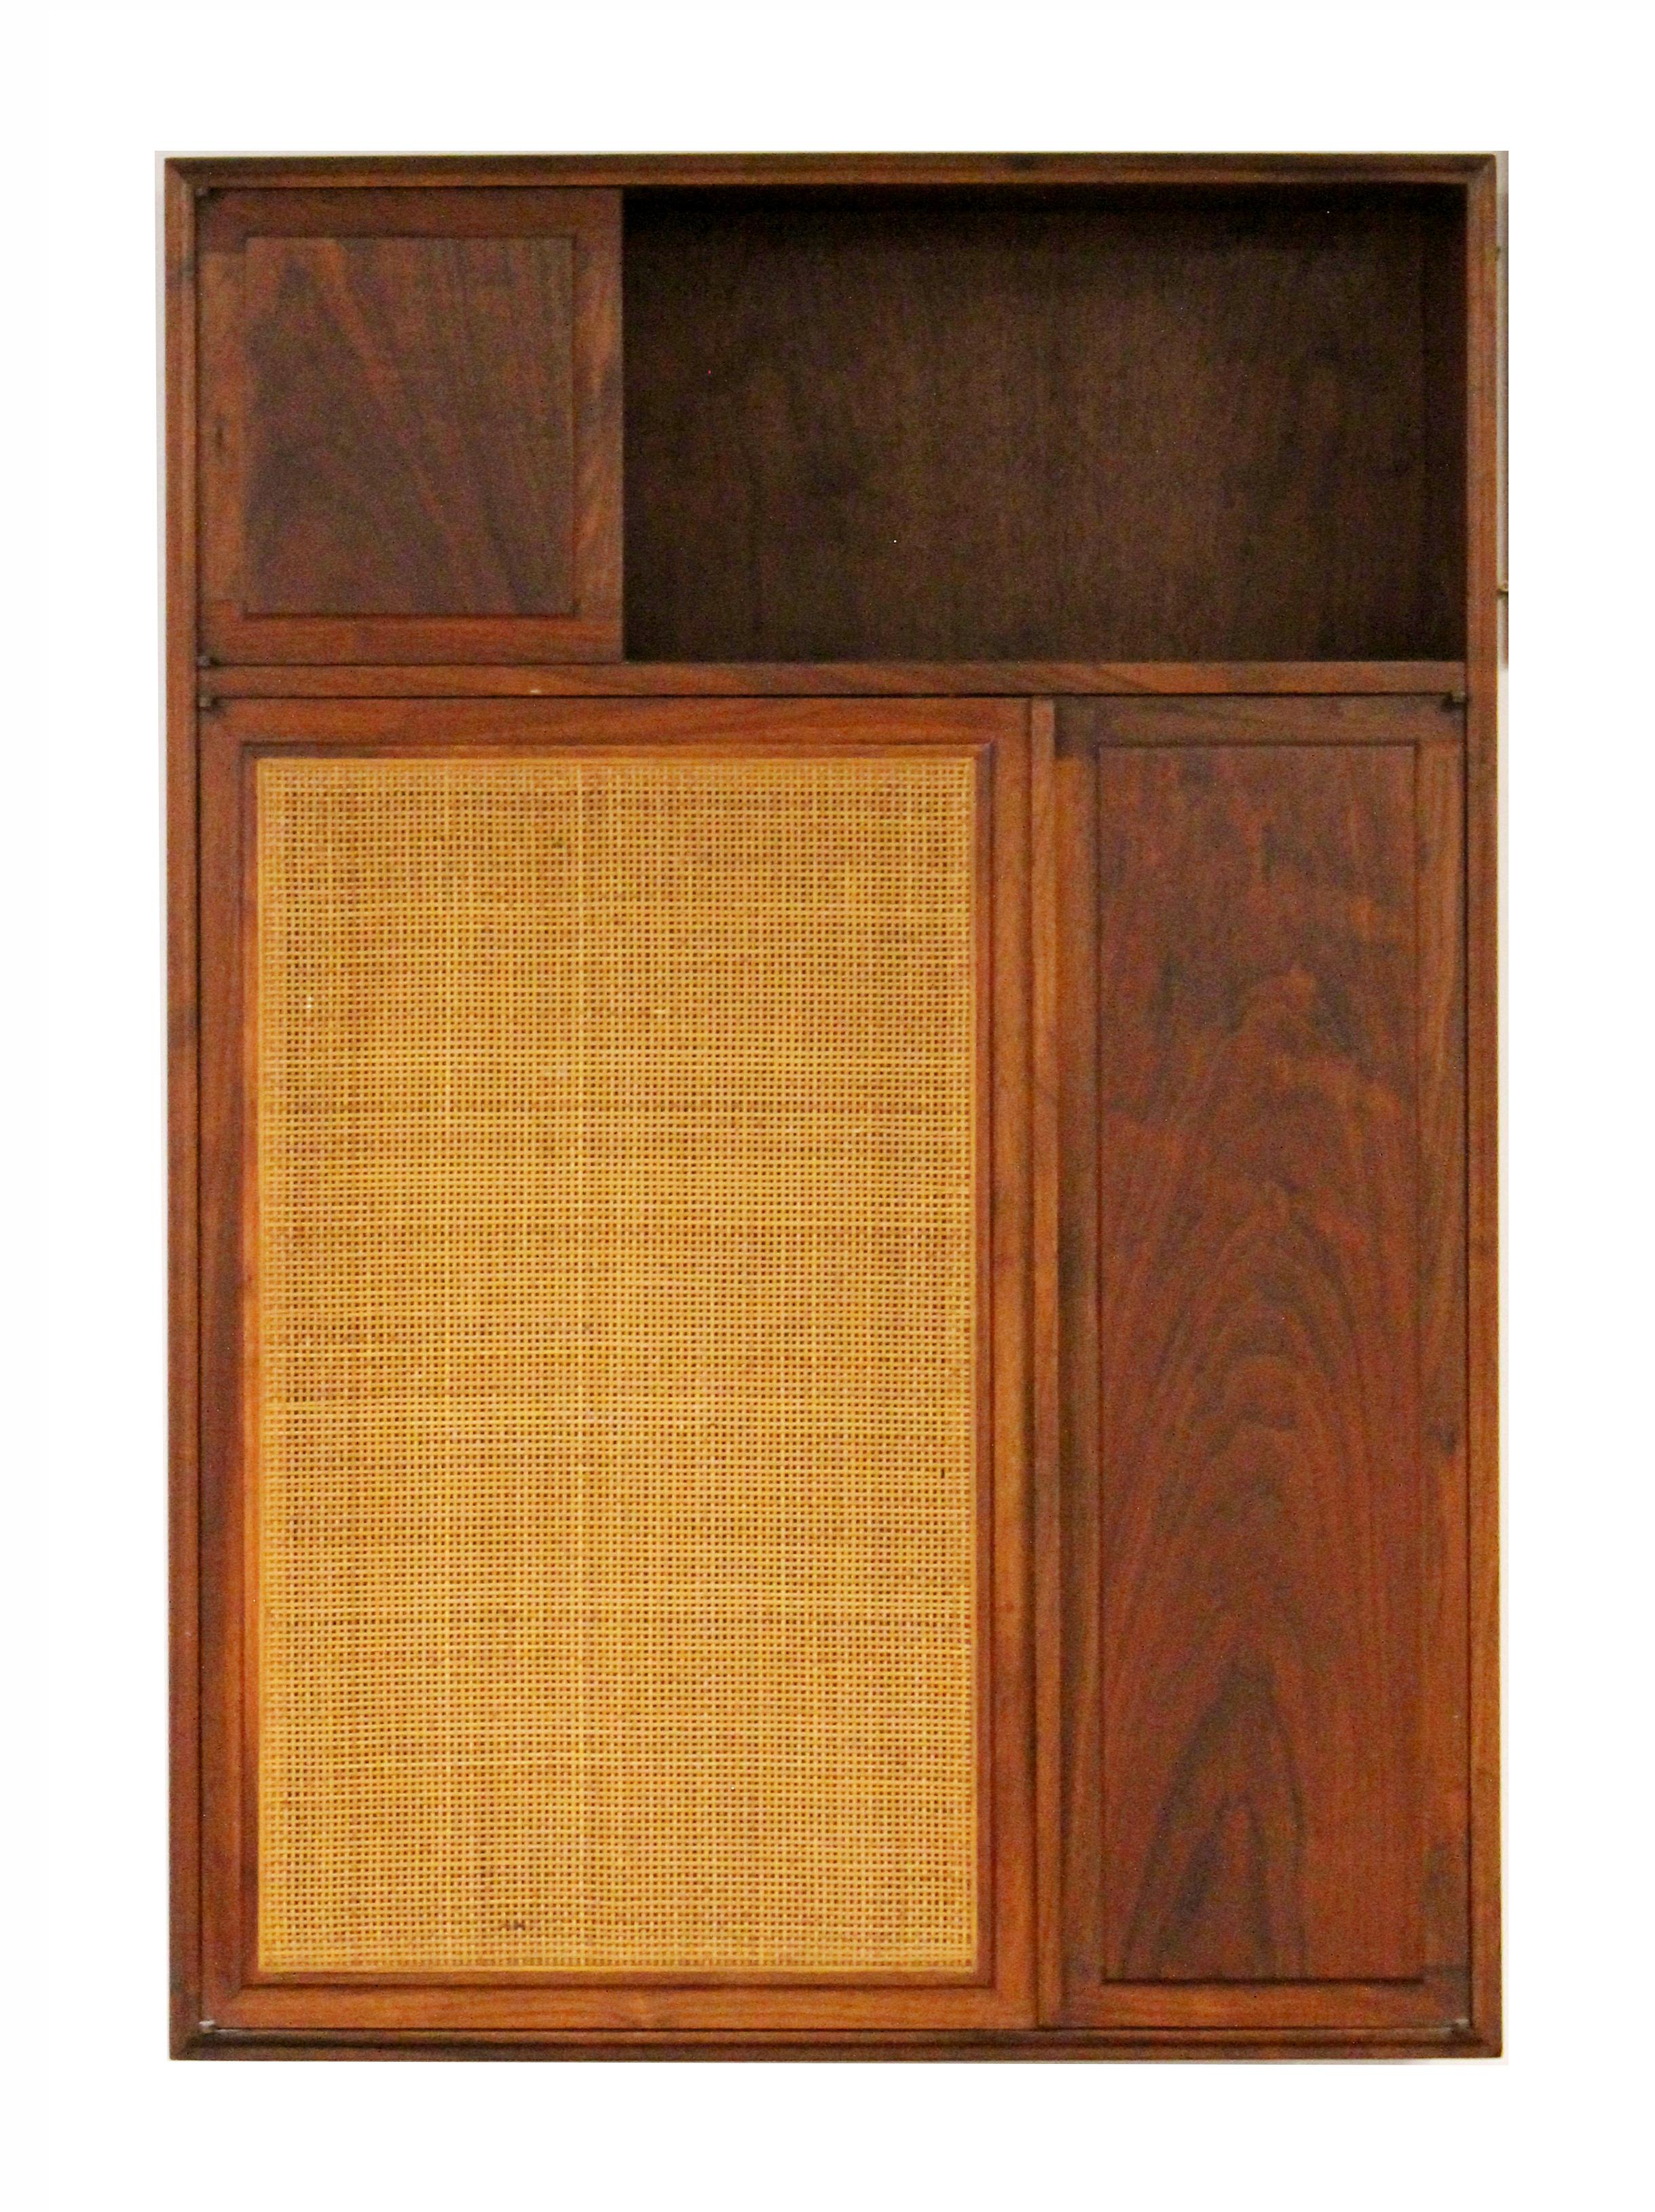 For your consideration is an outstanding Founders set, a hanging cabinet wall unit, made of walnut wood and cane, and a walnut credenza, circa the 1960s. In excellent vintage condition. The dimensions of the hanging cabinet are 33.5